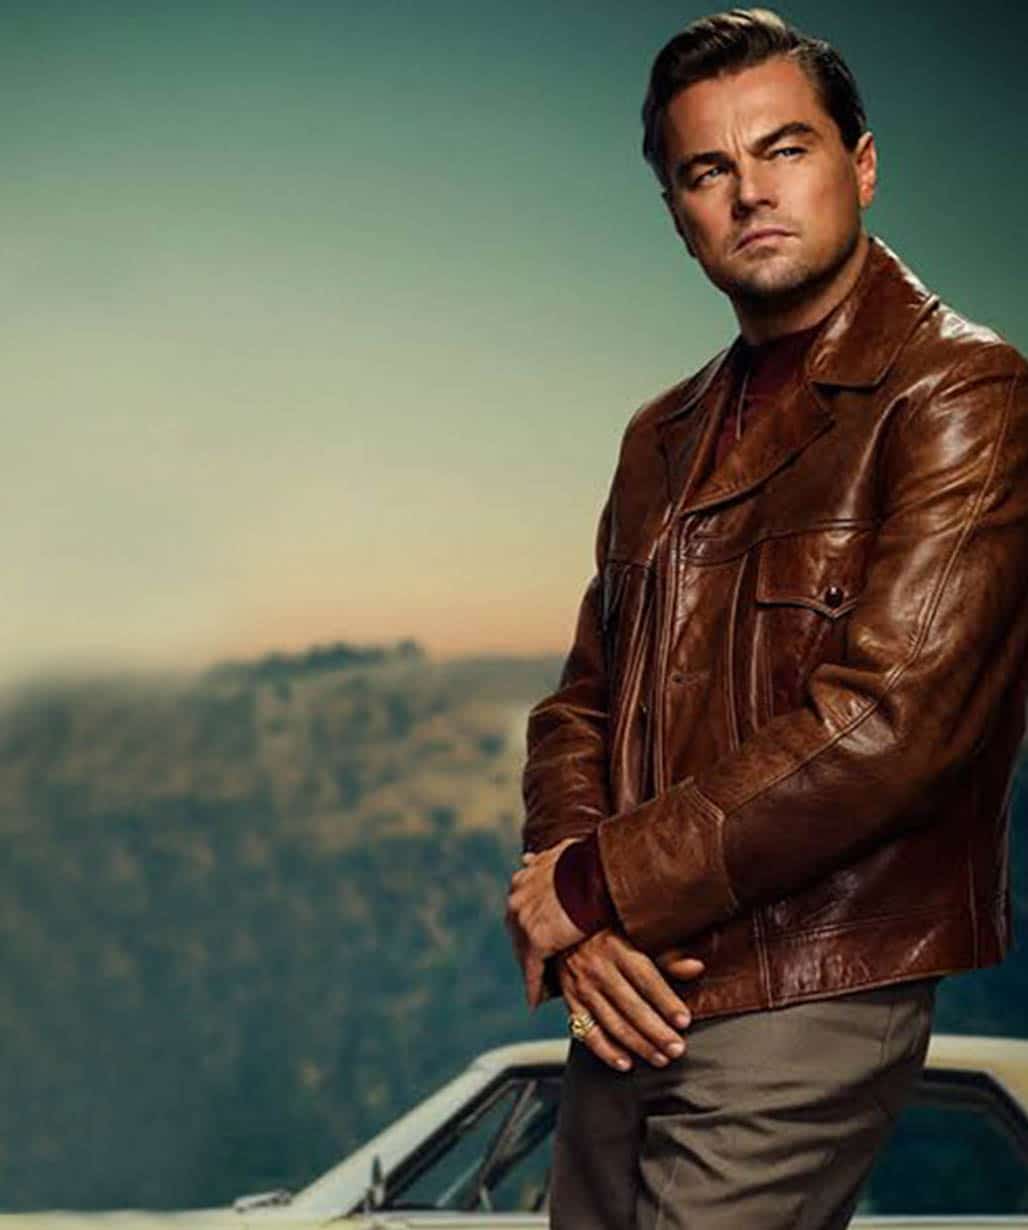 LEONARDO DICAPRIO ONCE UPON A TIME IN HOLLYWOOD JACKET